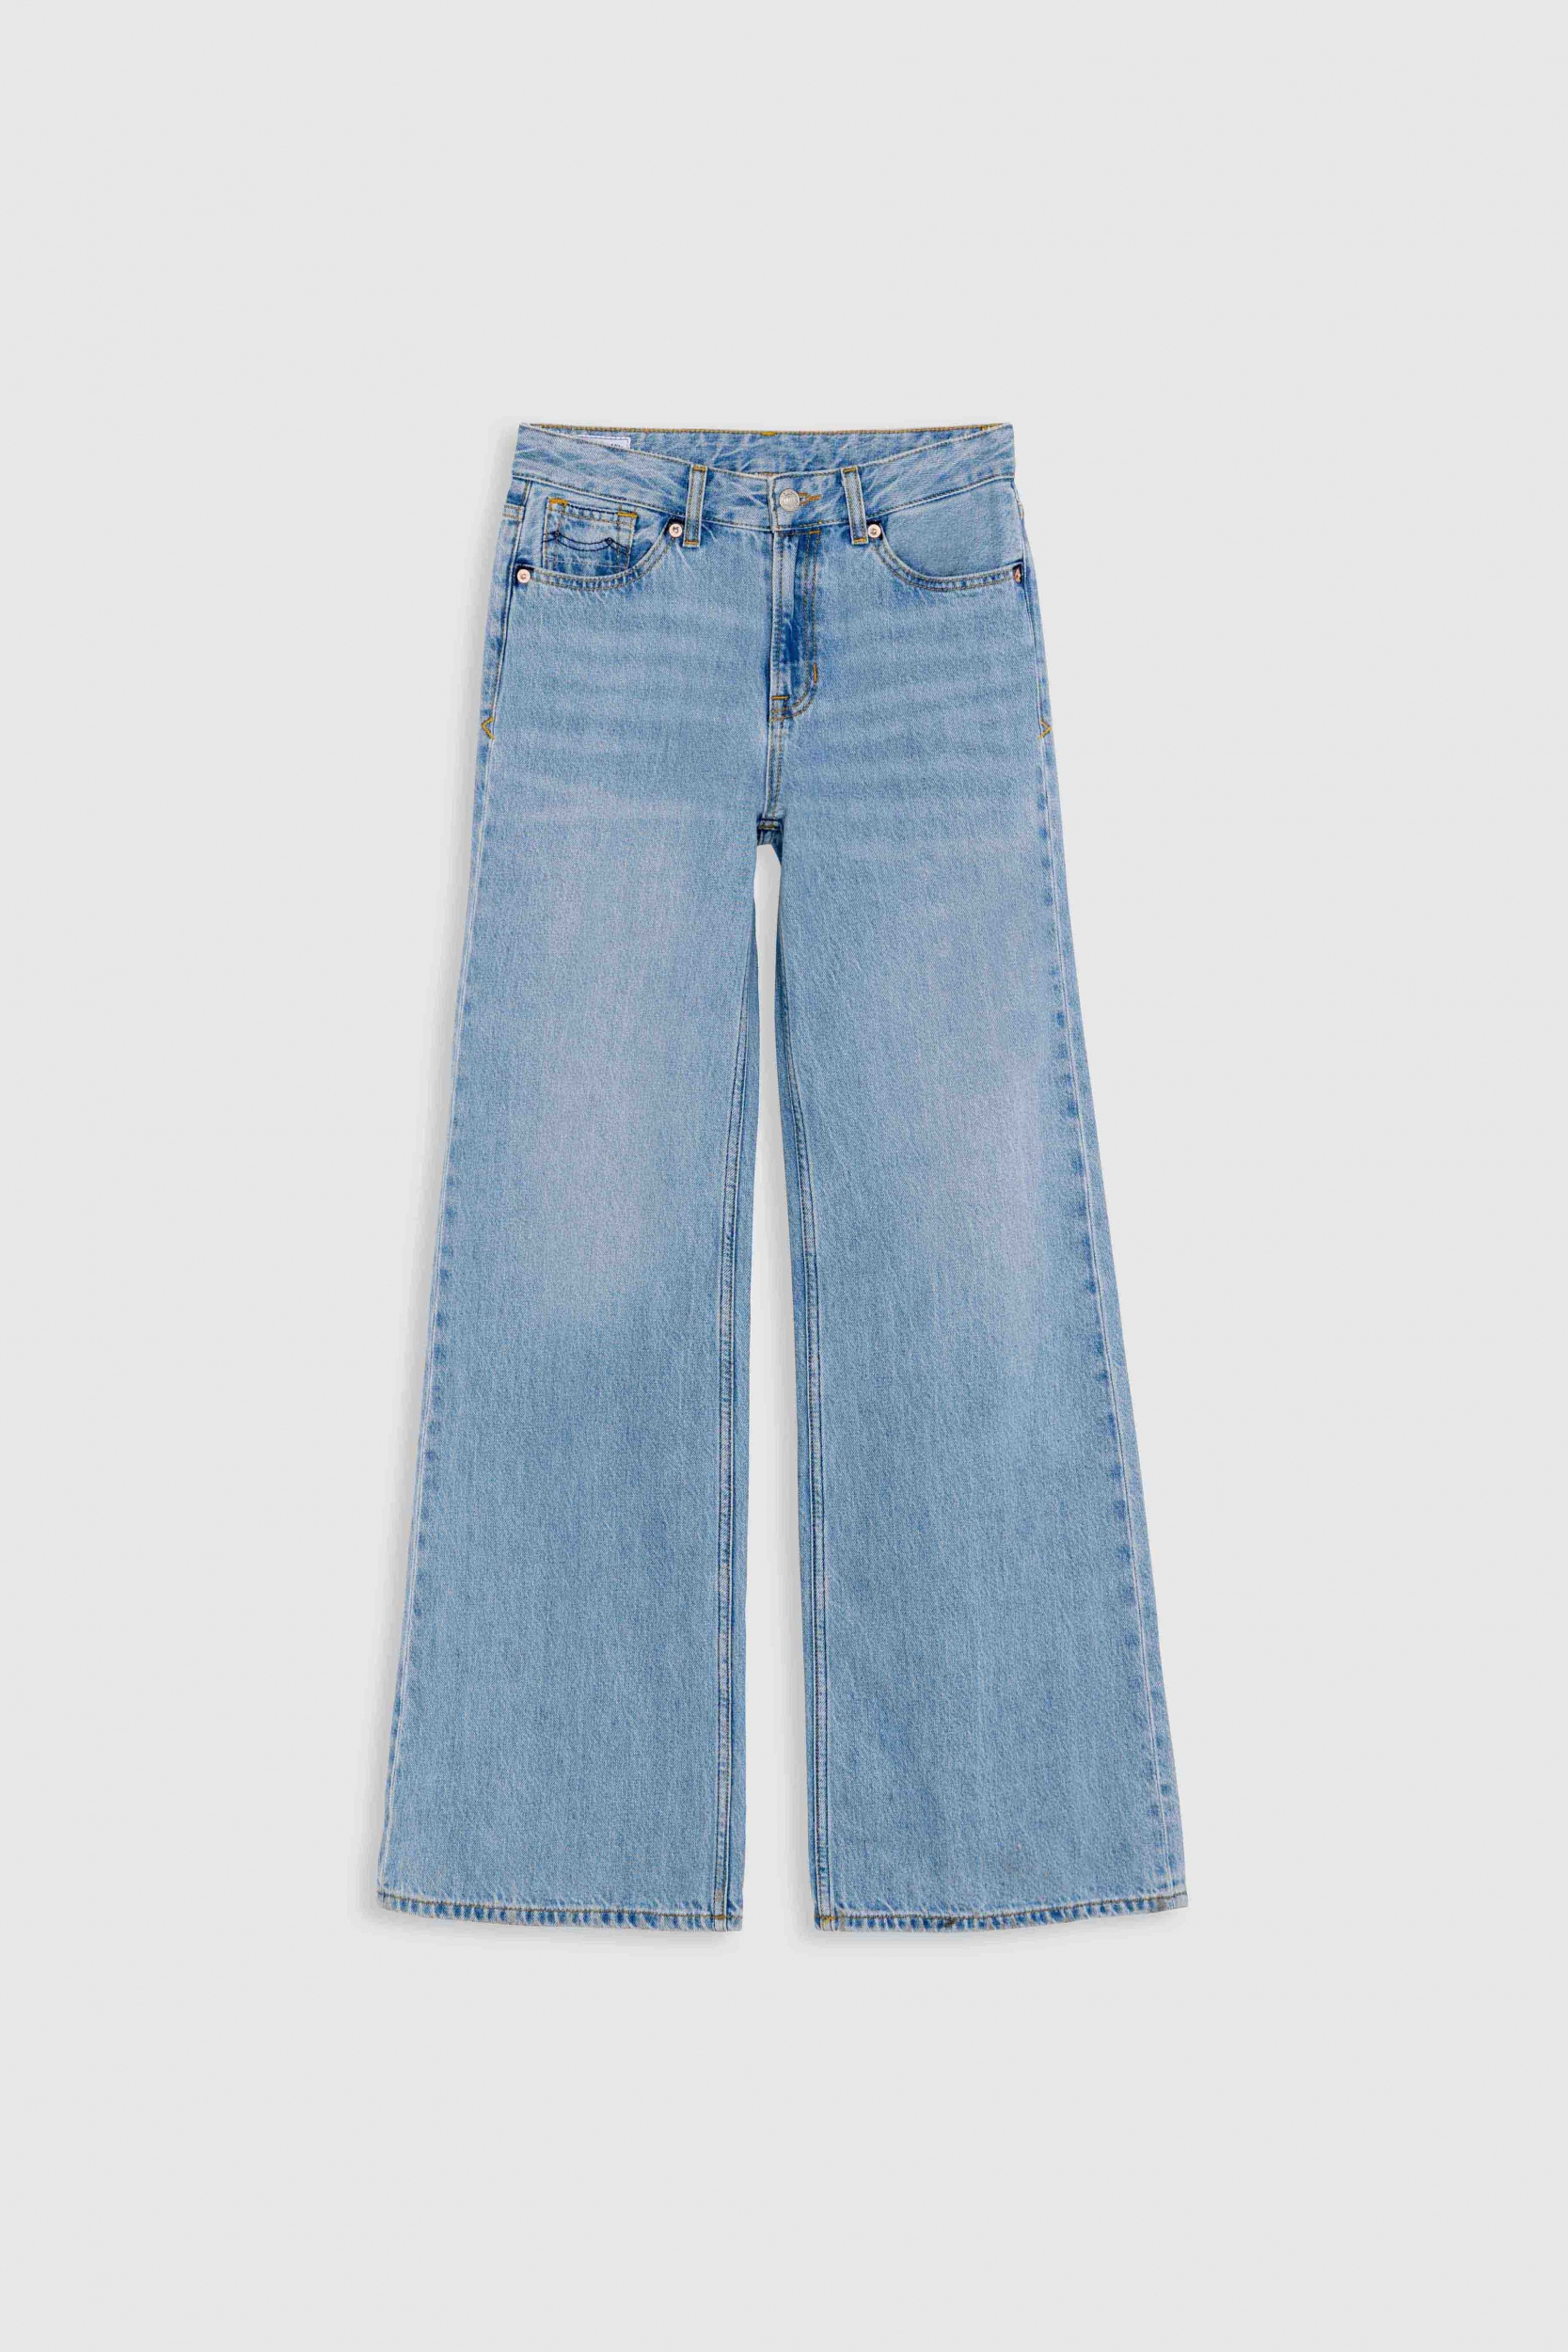 Jane - Mid rise Relaxed flare - Blue Reef Super Light Used